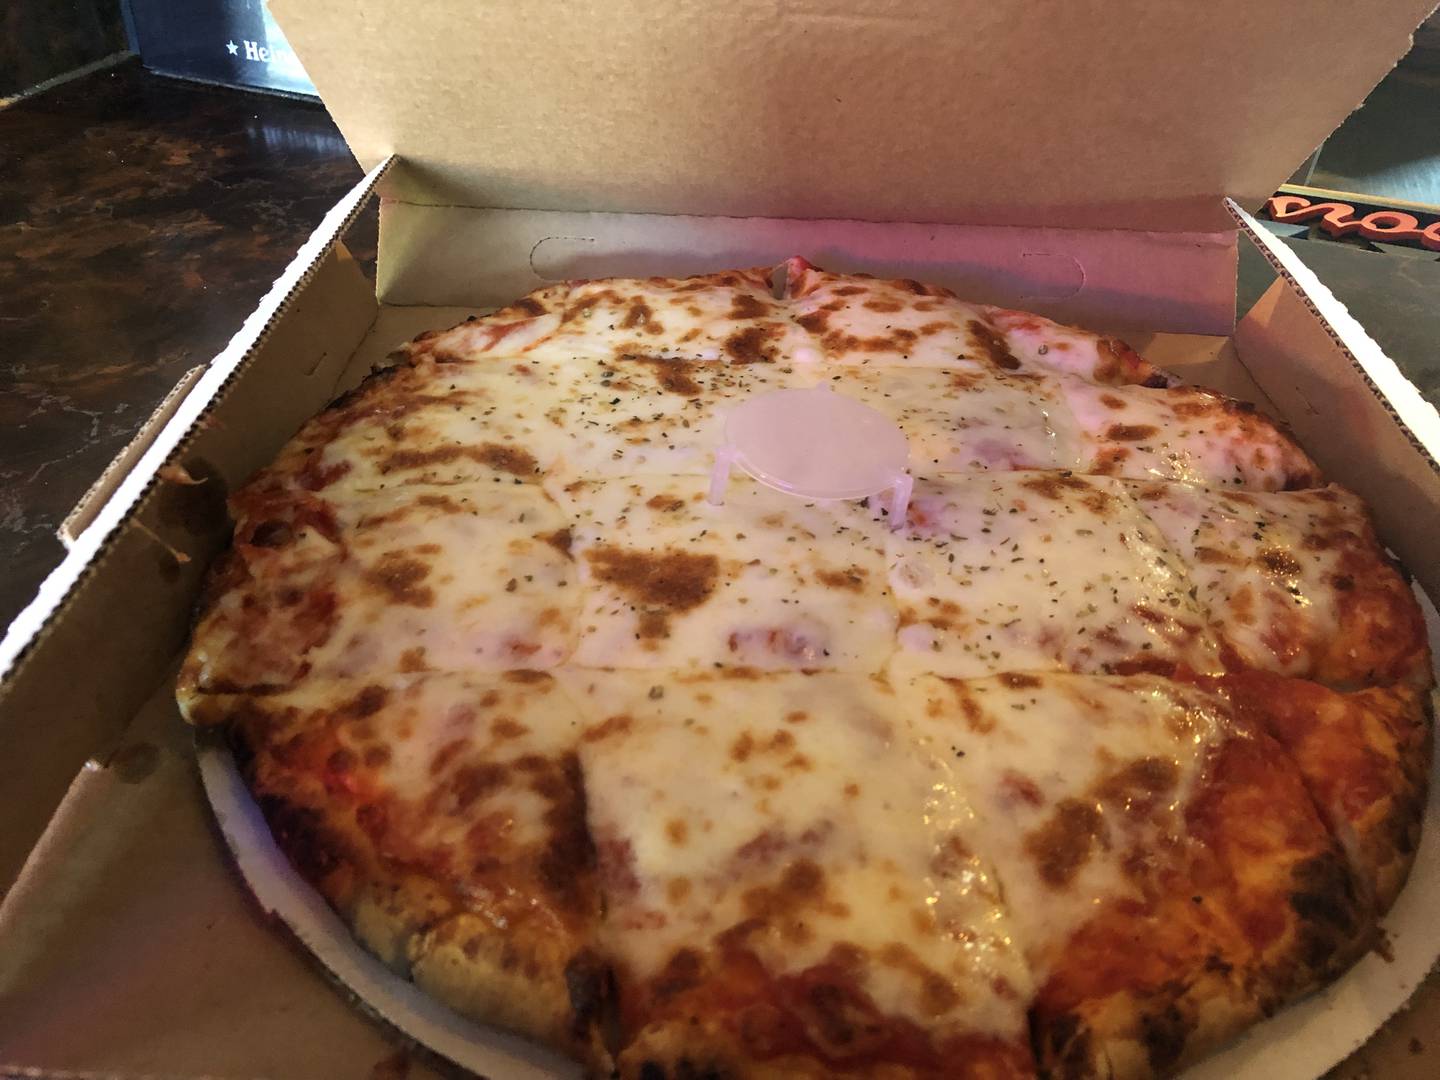 A cheese pizza with a homemade crust from Hoops Bar and Grill, Hebron.